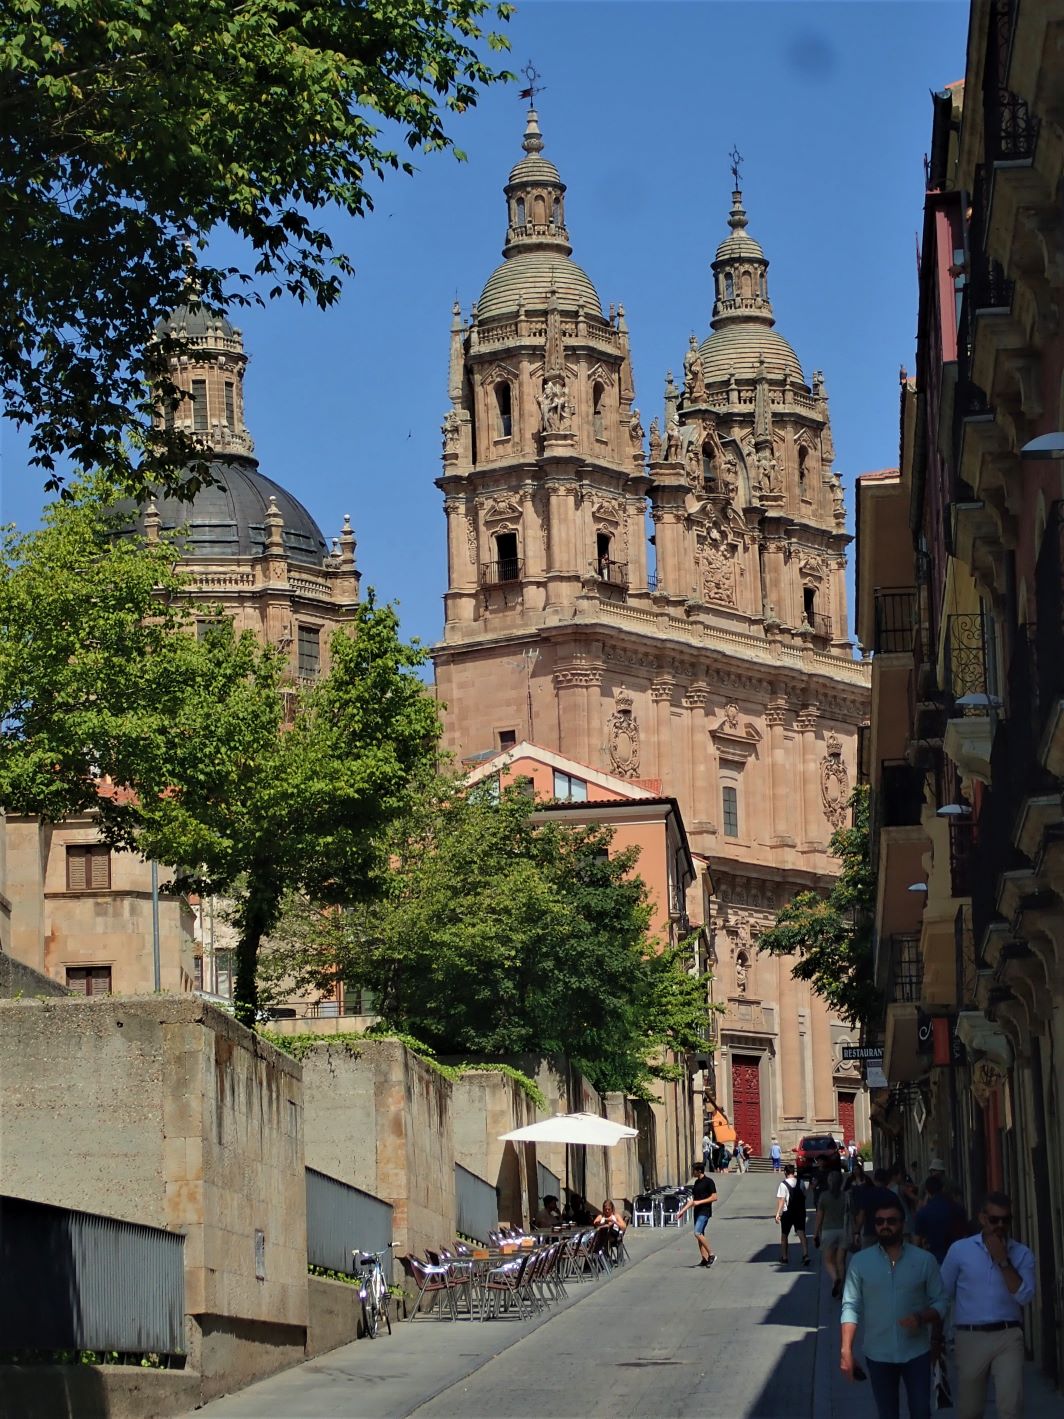 Street scene leading to the New Cathedral in Salamanca, Spain